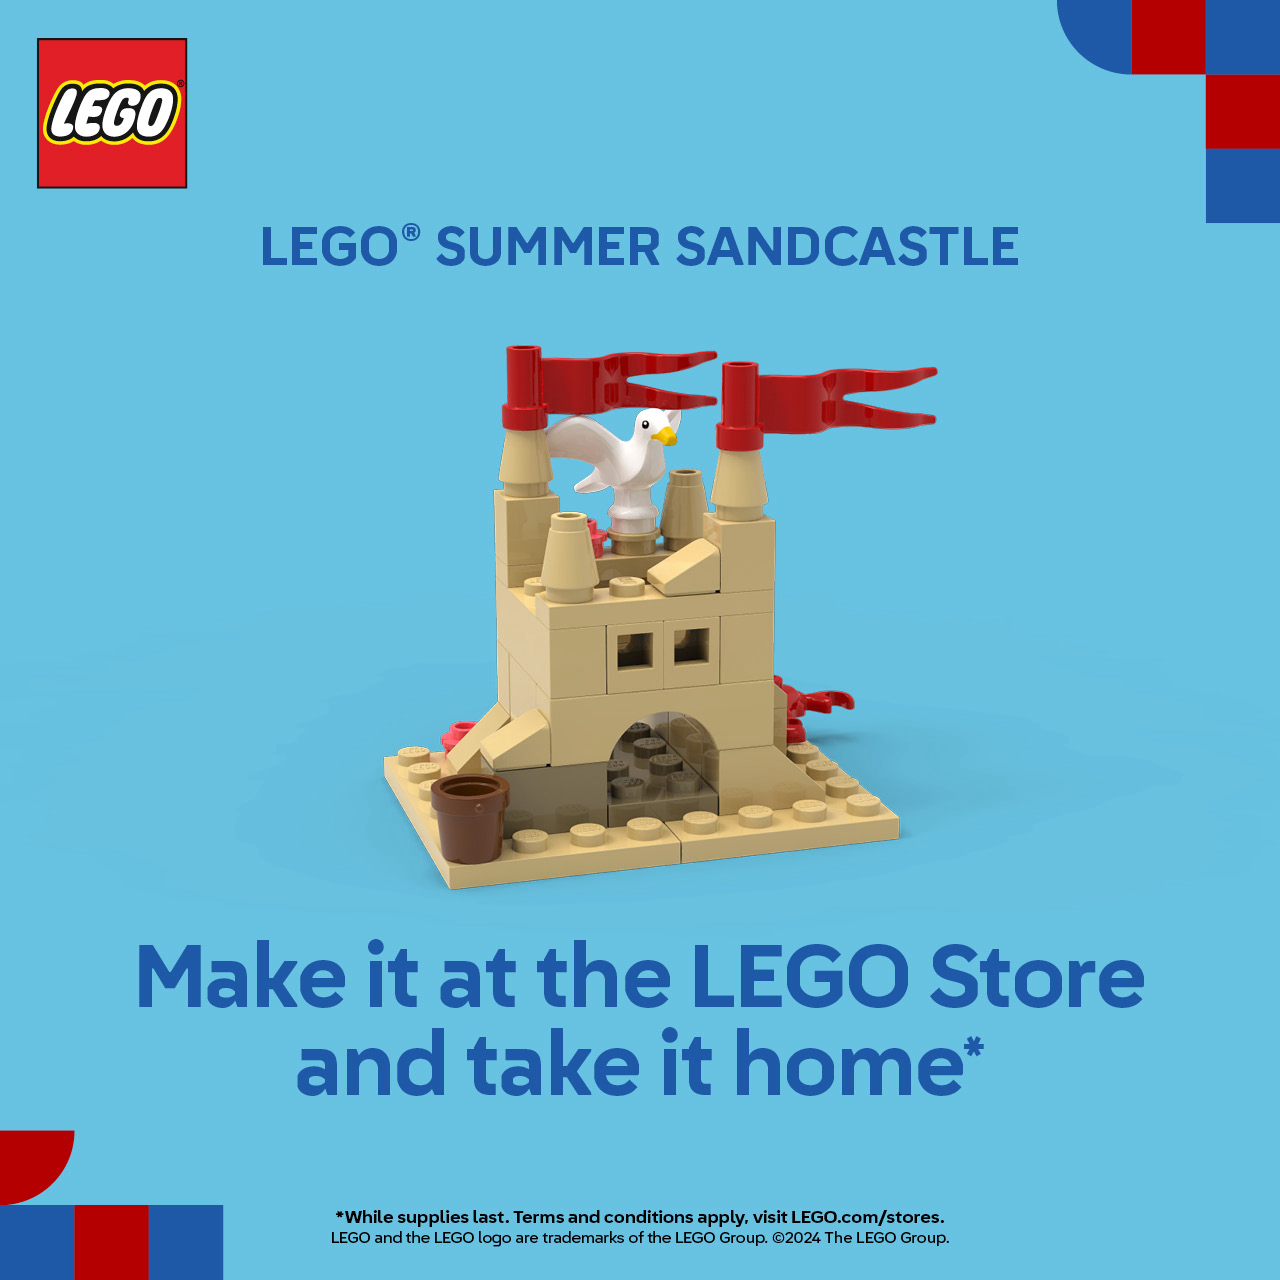 LEGO USCA Campaign 53 Build a LEGO® Summer Sandcastle at The LEGO Store and take it home with you EN 1280x1280 1